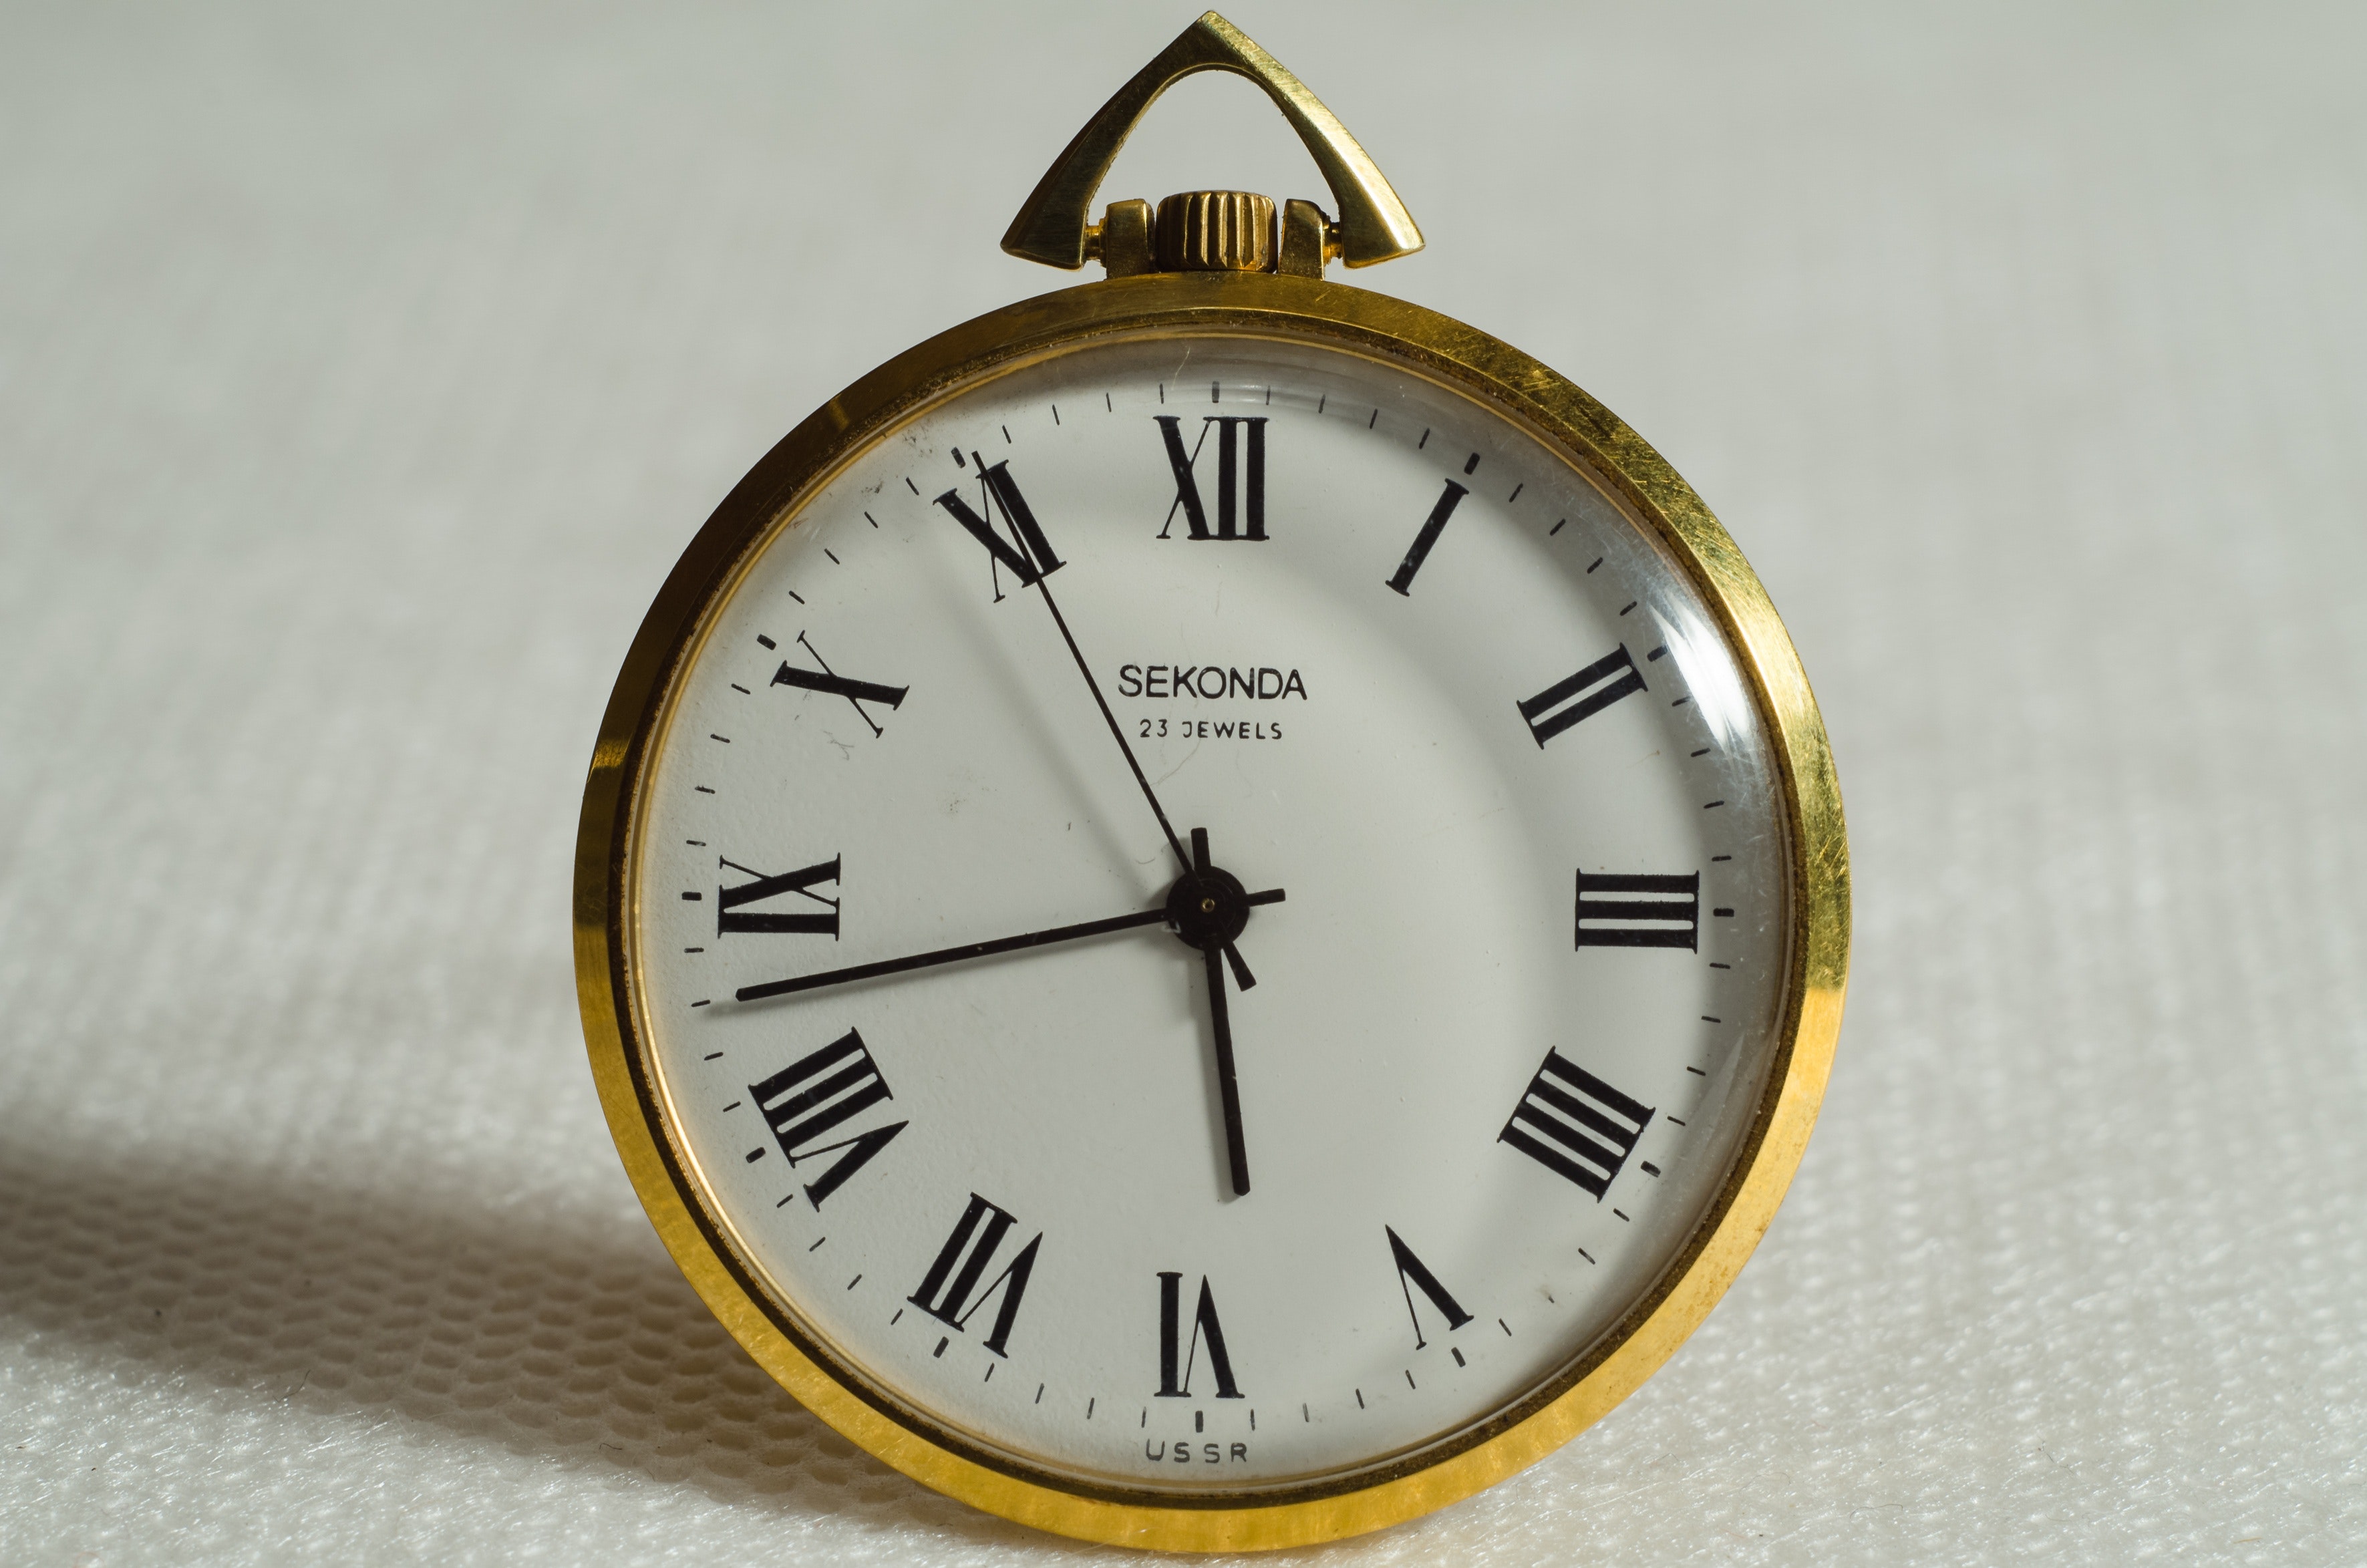 Brass Pocket Watch Pointing at 5 43, Antique, Classic, Clock, Pocket watch, HQ Photo